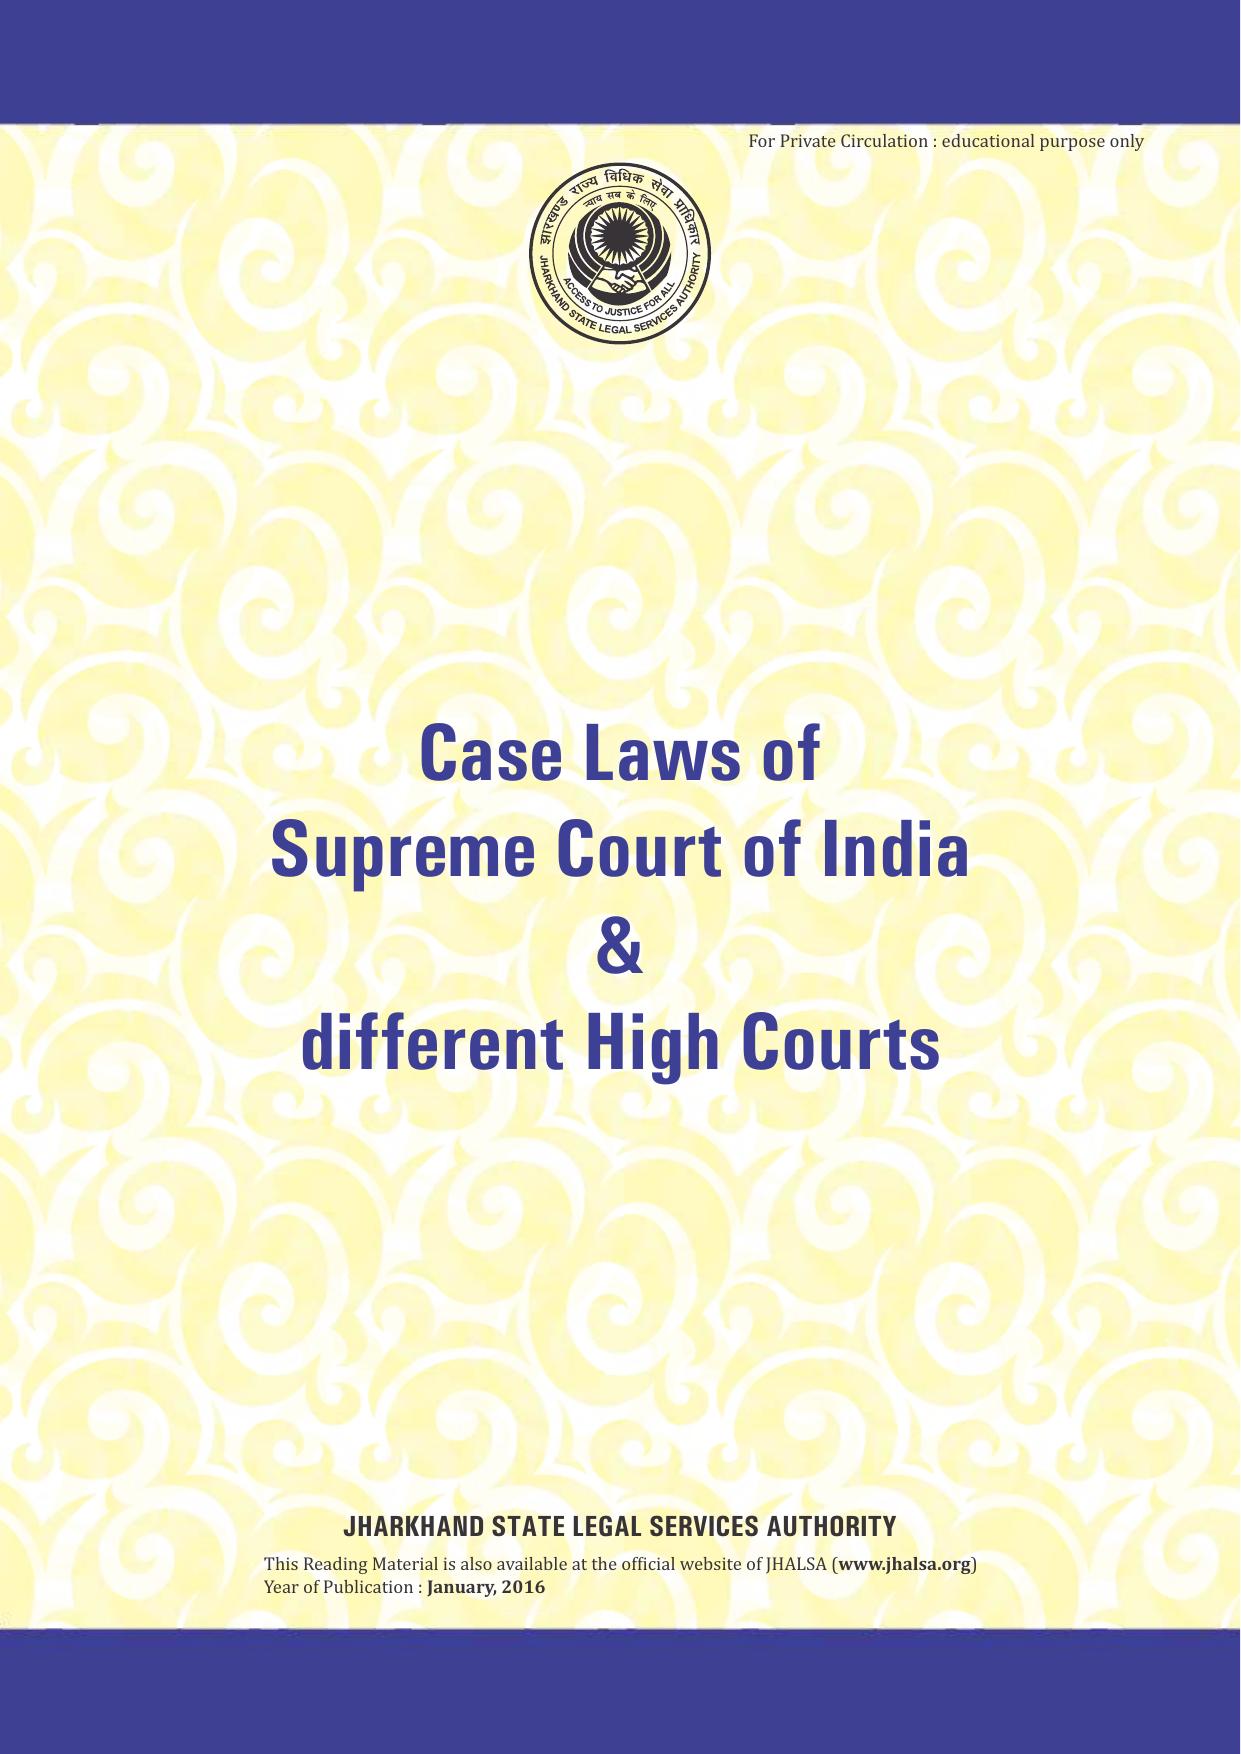 Case Laws of Supreme Court of India & different High Courts 2016